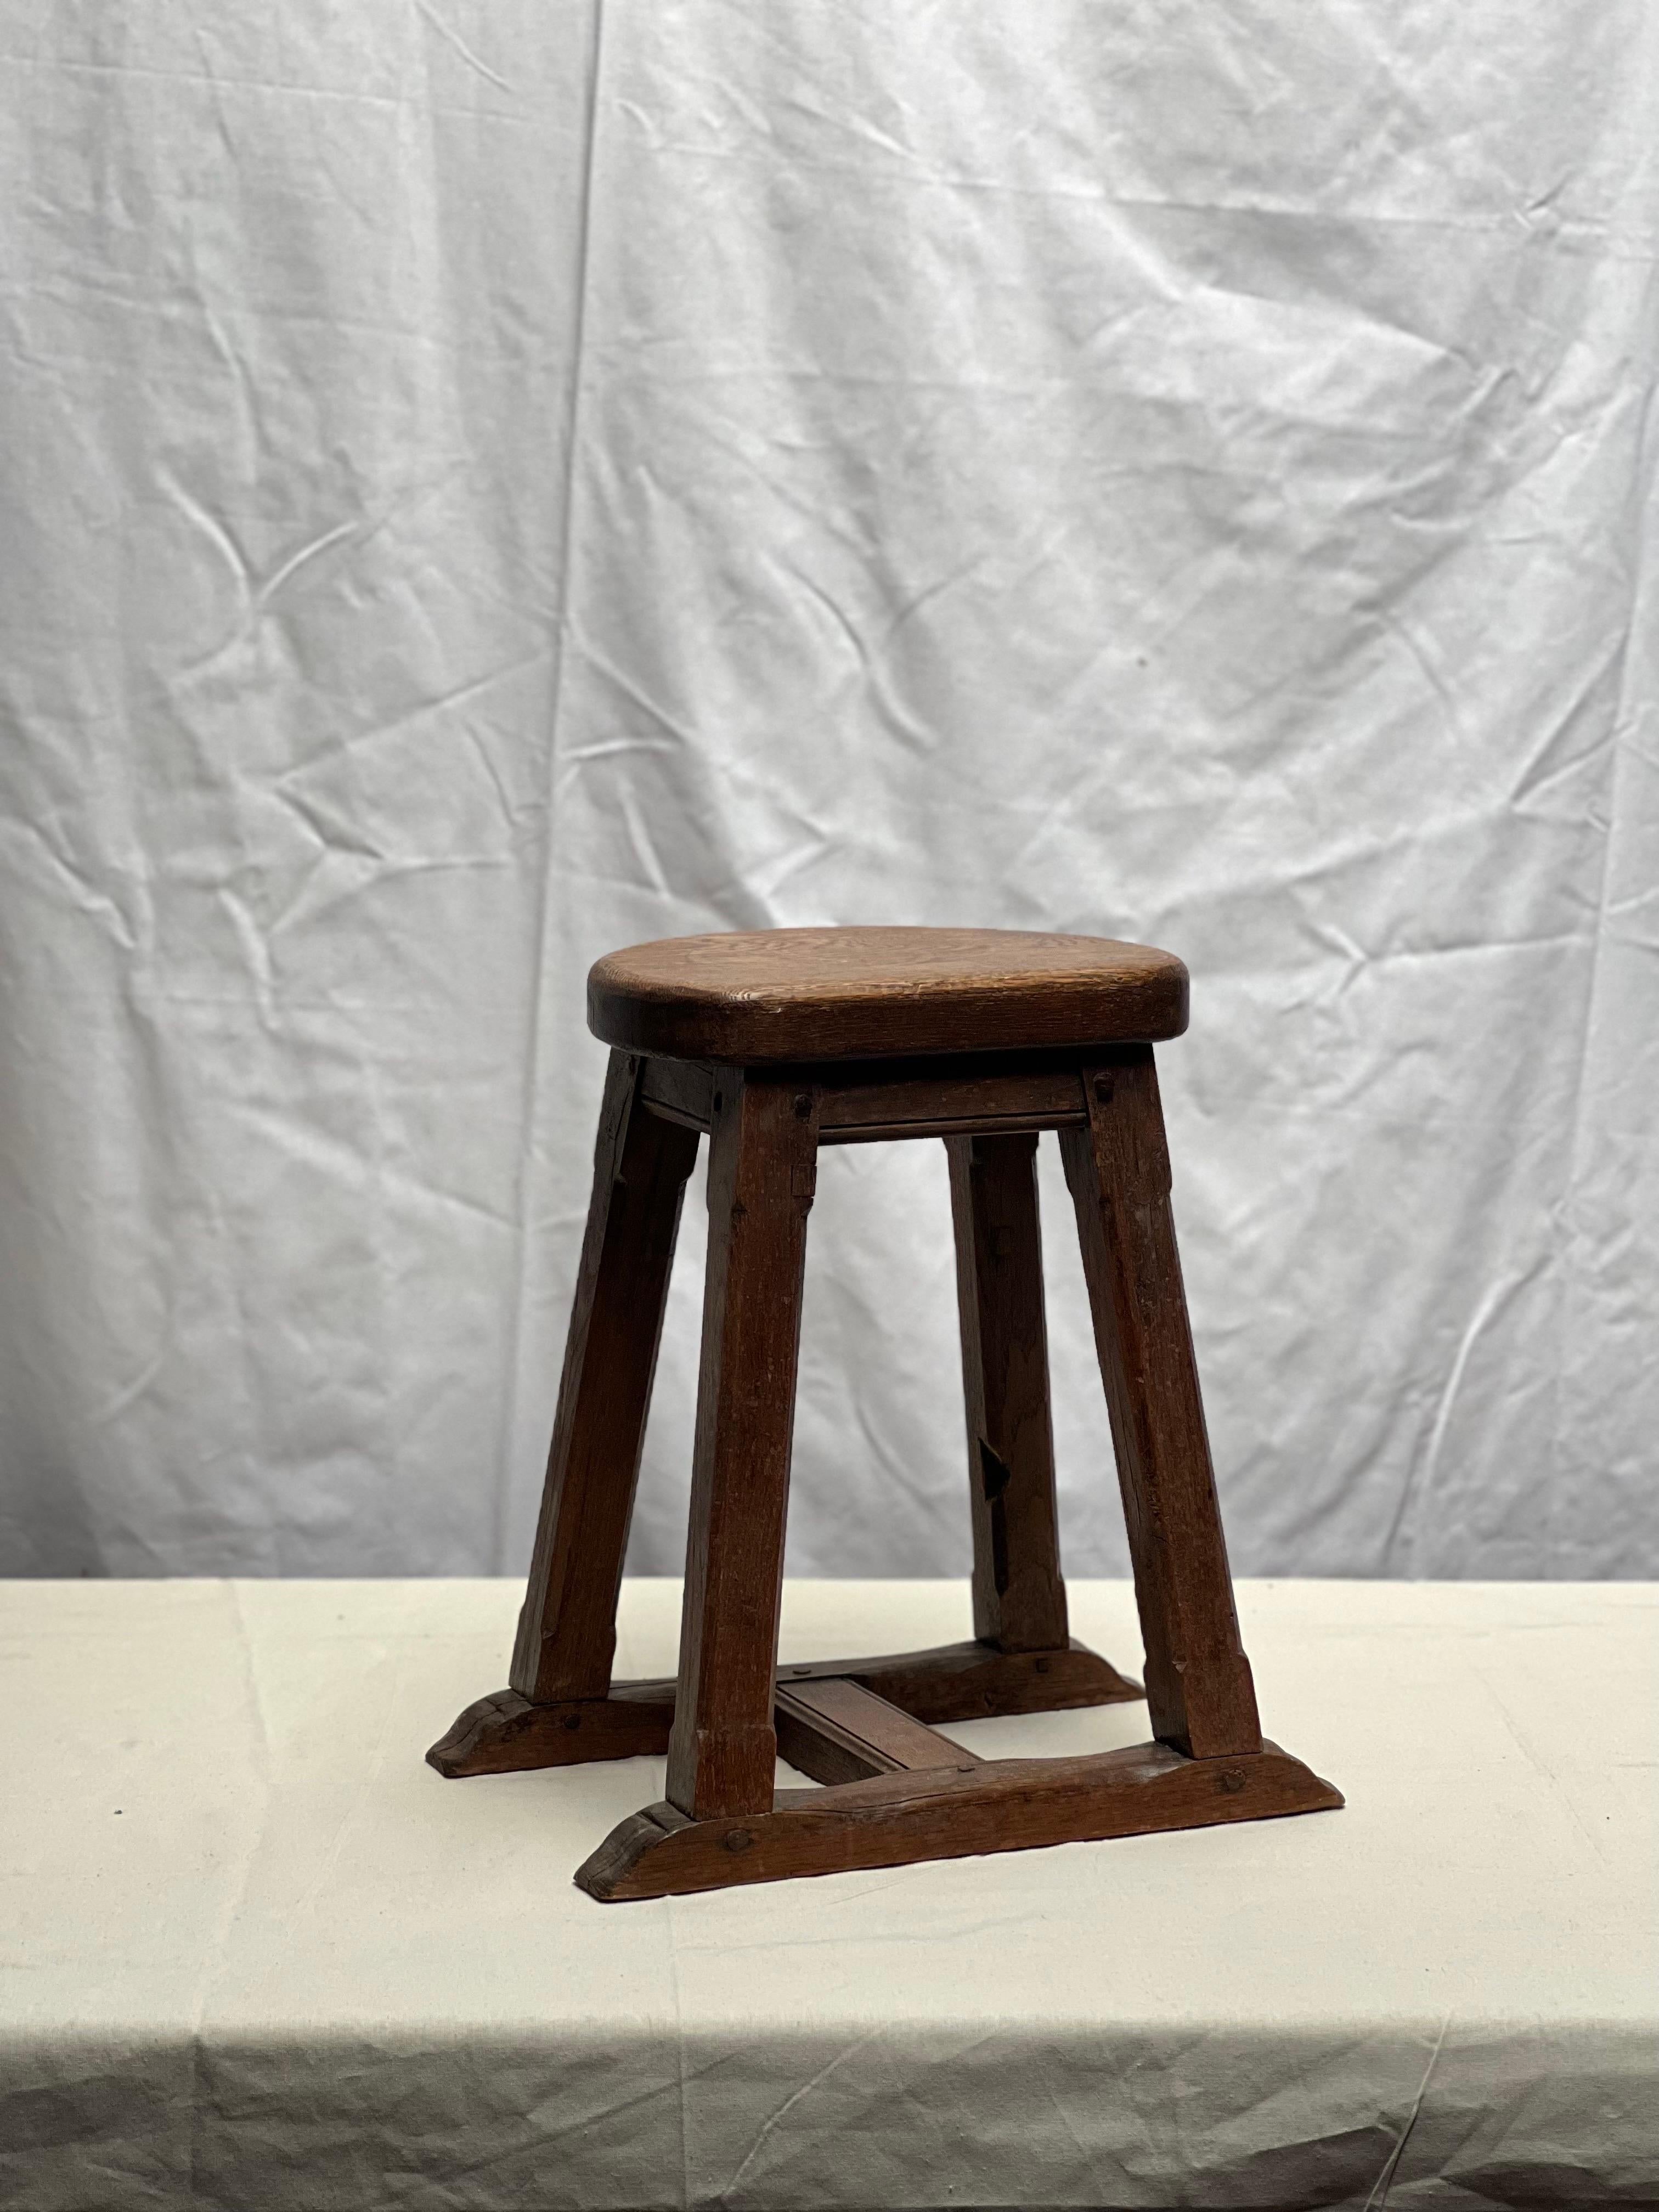 Hand-Crafted Strong French Stained Wooden Stool with handle circa 1900 Brutalist For Sale